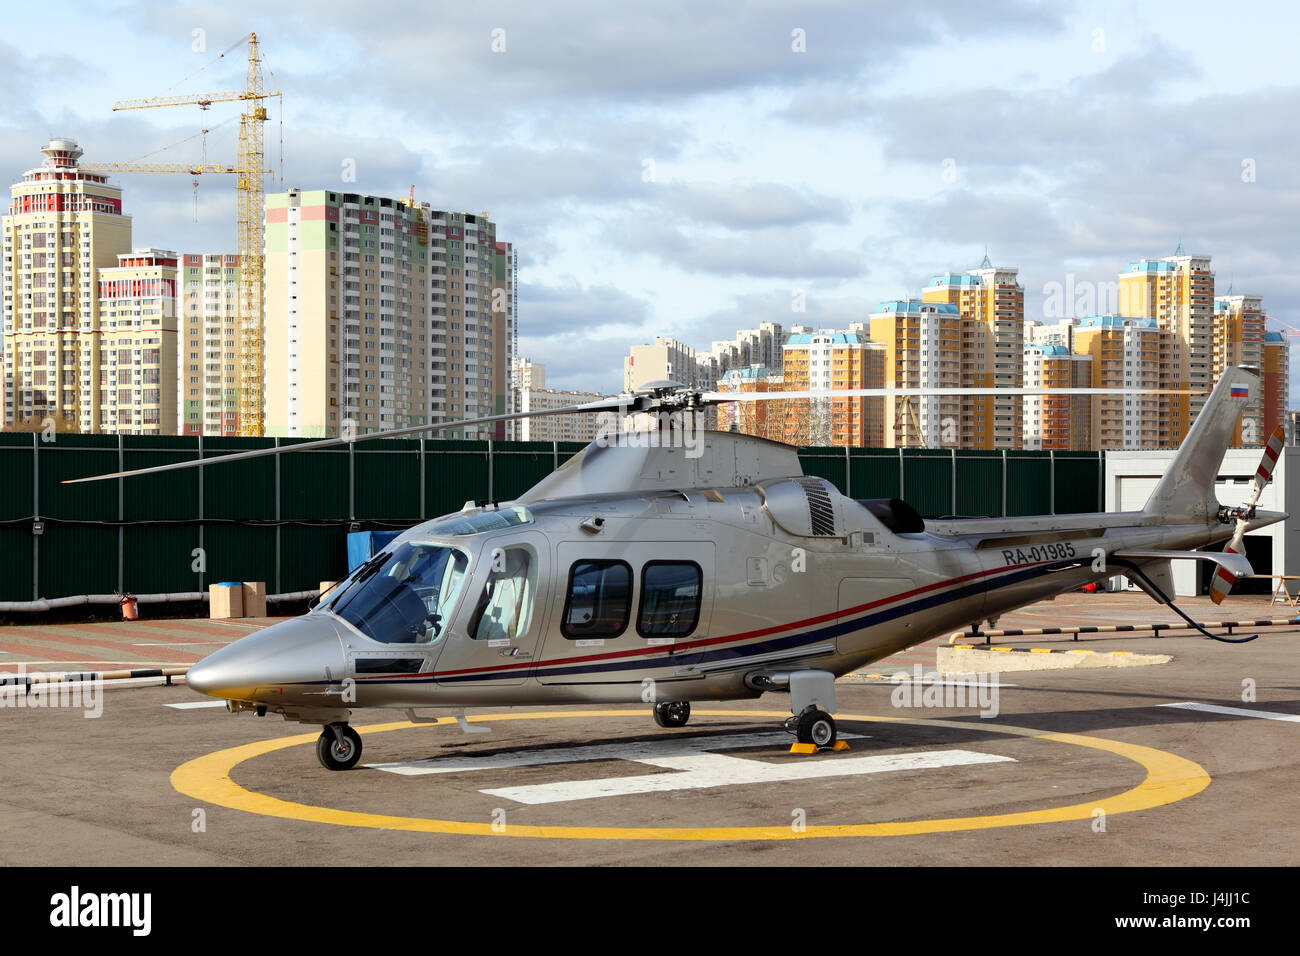 CROCUS EXPO, MOSCOW REGION, RUSSIA - OCTOBER 6, 2013: Private Agusta Westland A109 helicopter RA-01985 at Crocus airfield. Stock Photo